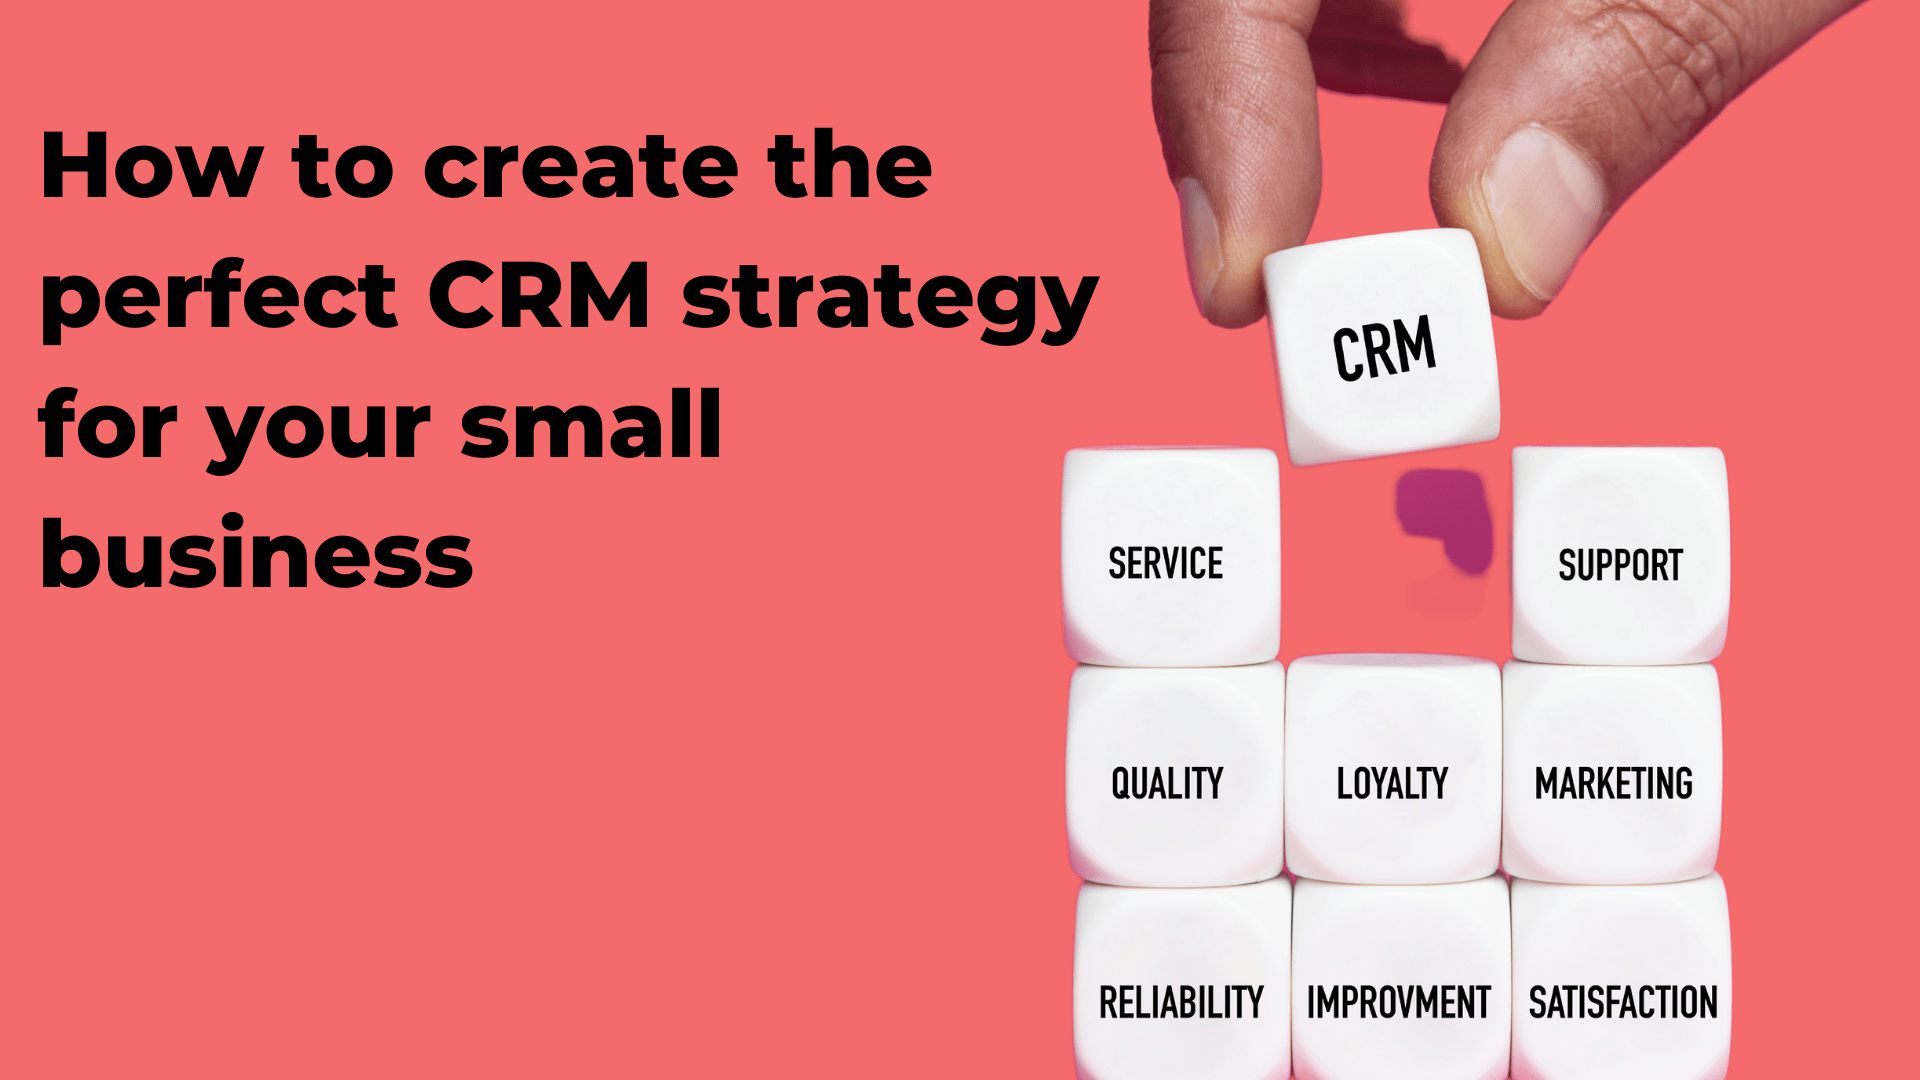 How To Create The Perfect CRM Strategy For Your Small Business